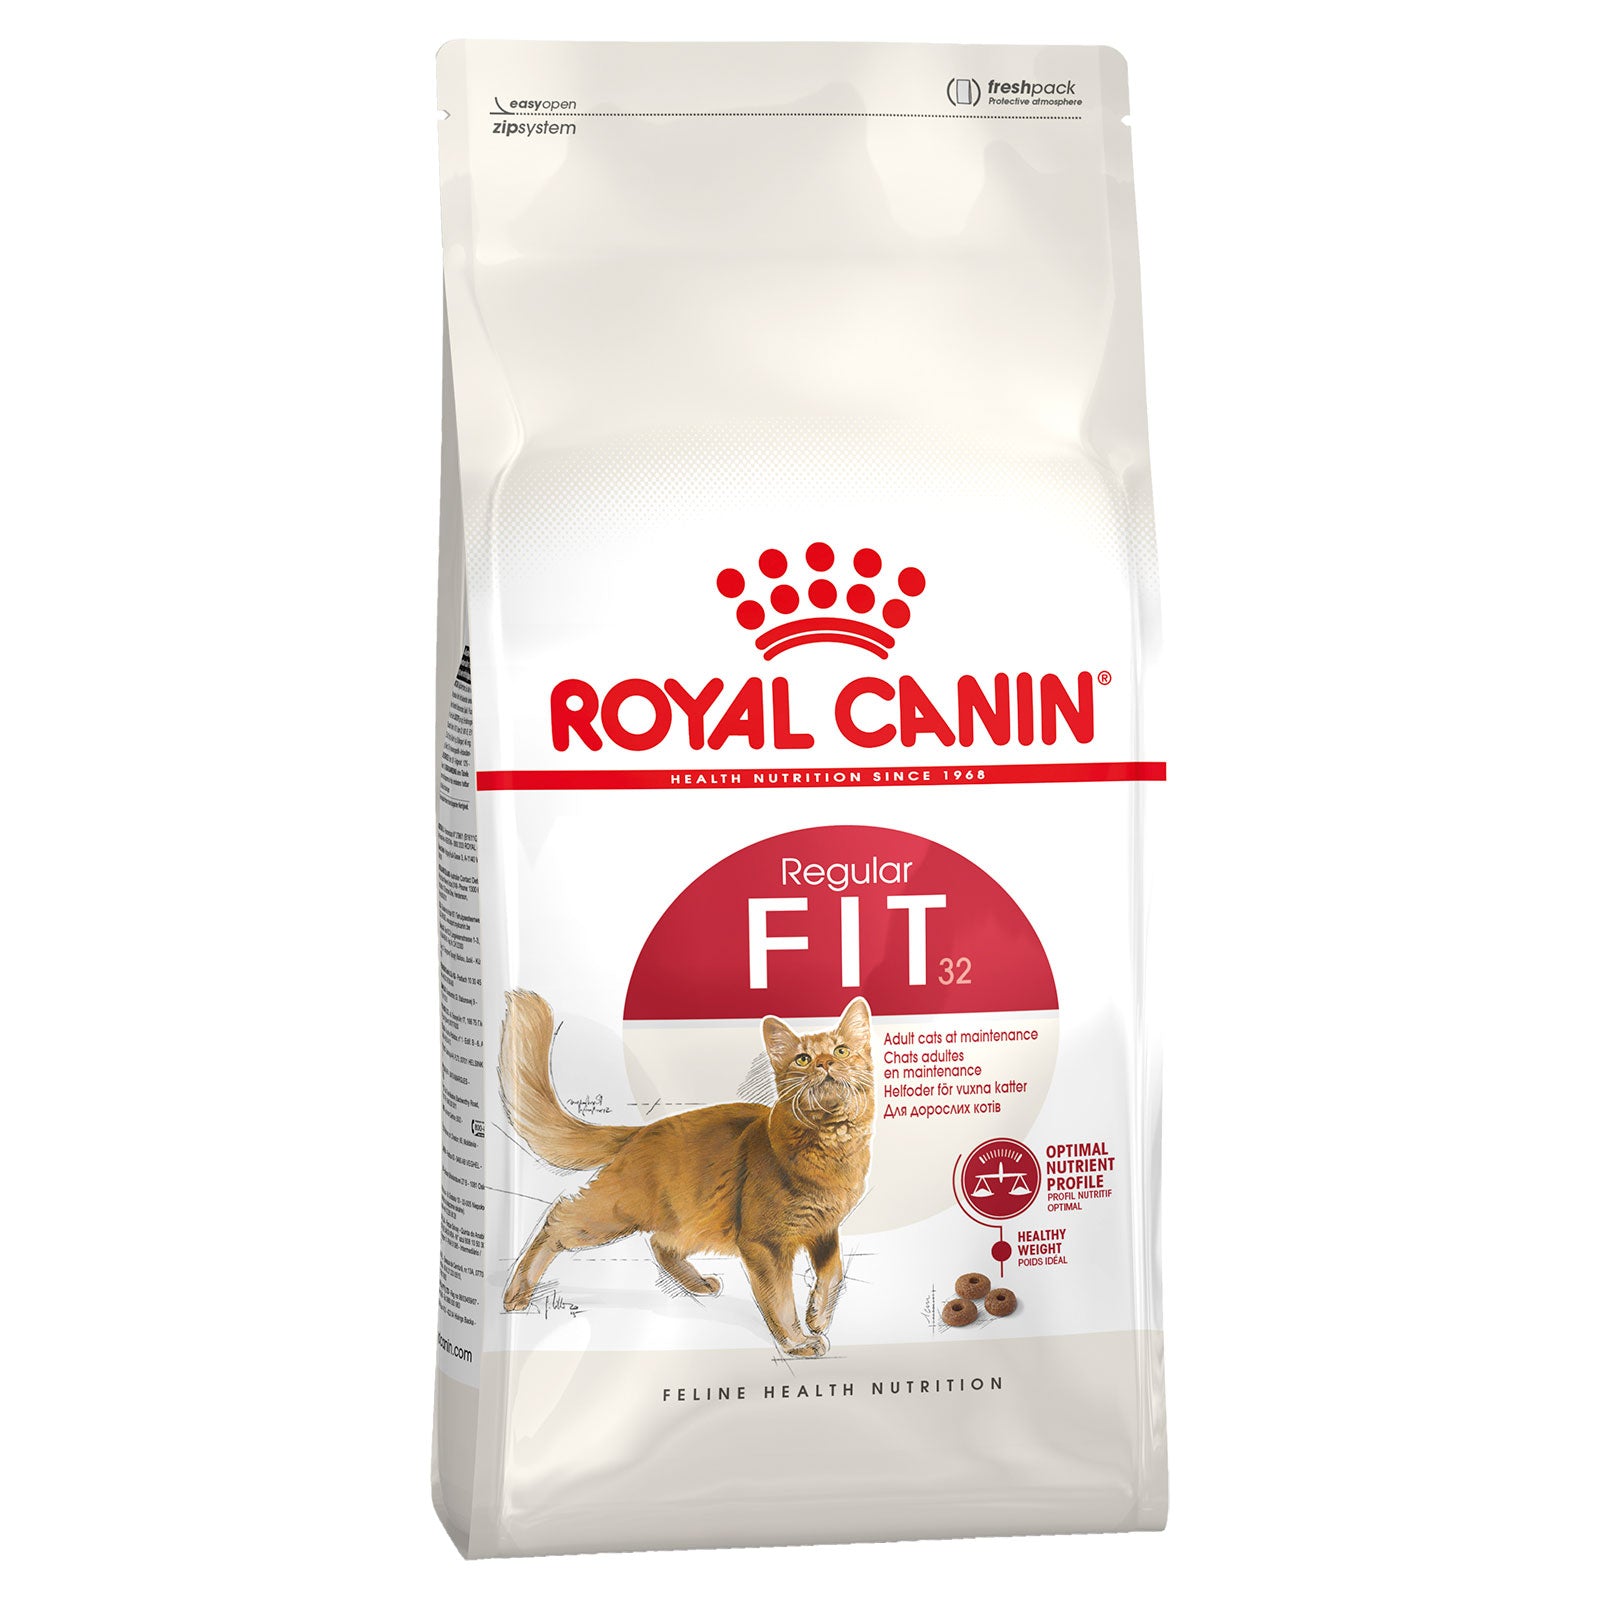 Royal Canin Cat Food Adult Fit 32